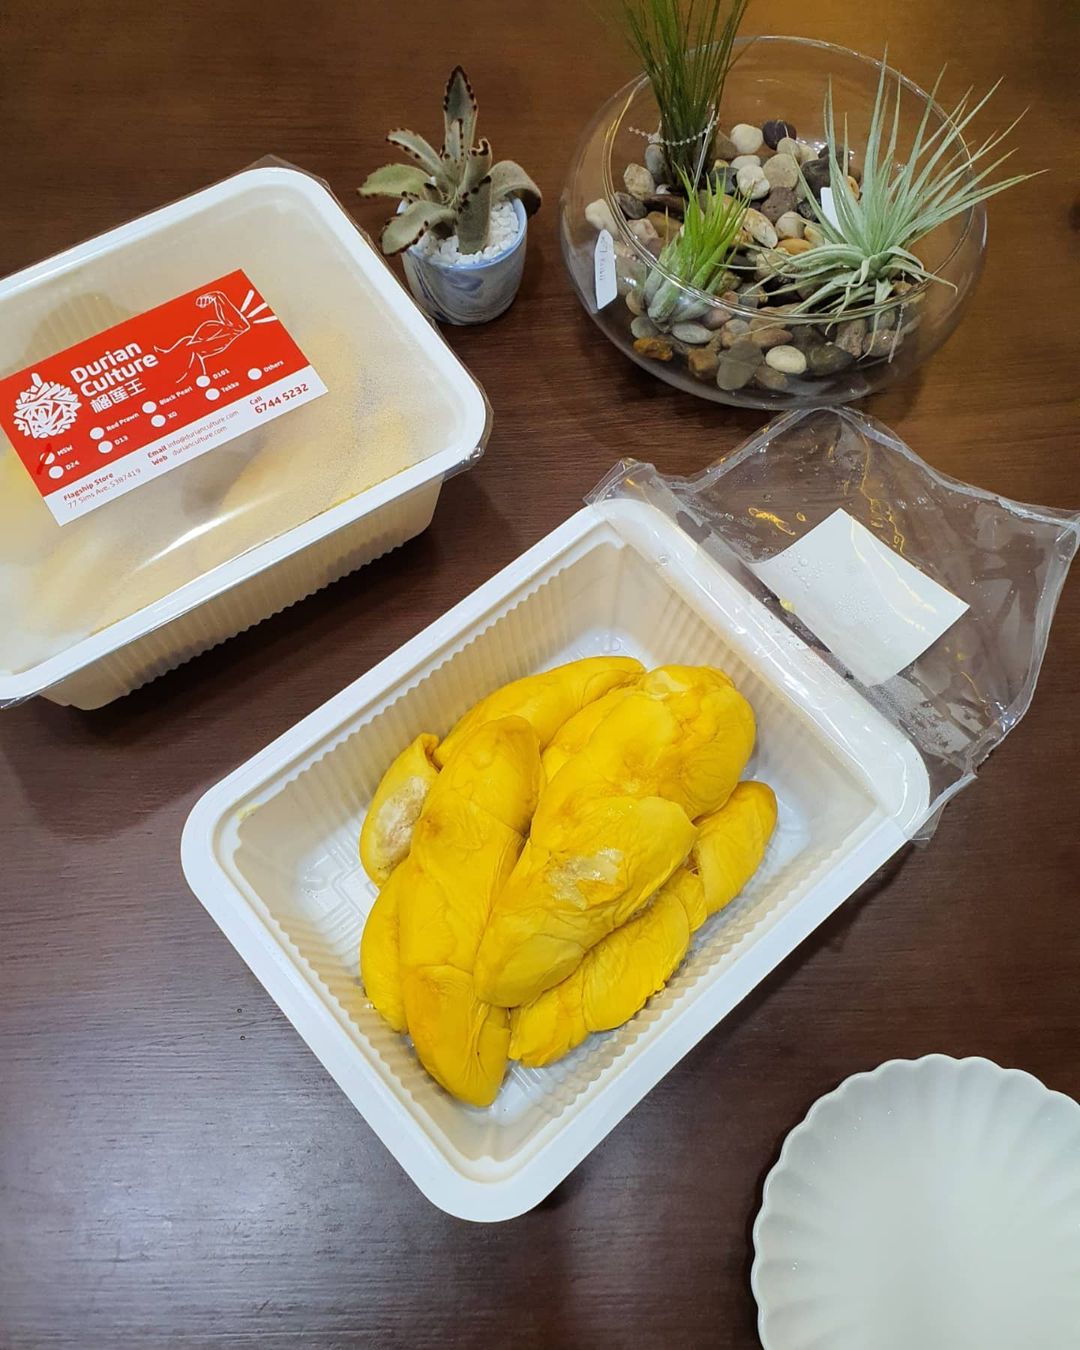 durian culture - msw